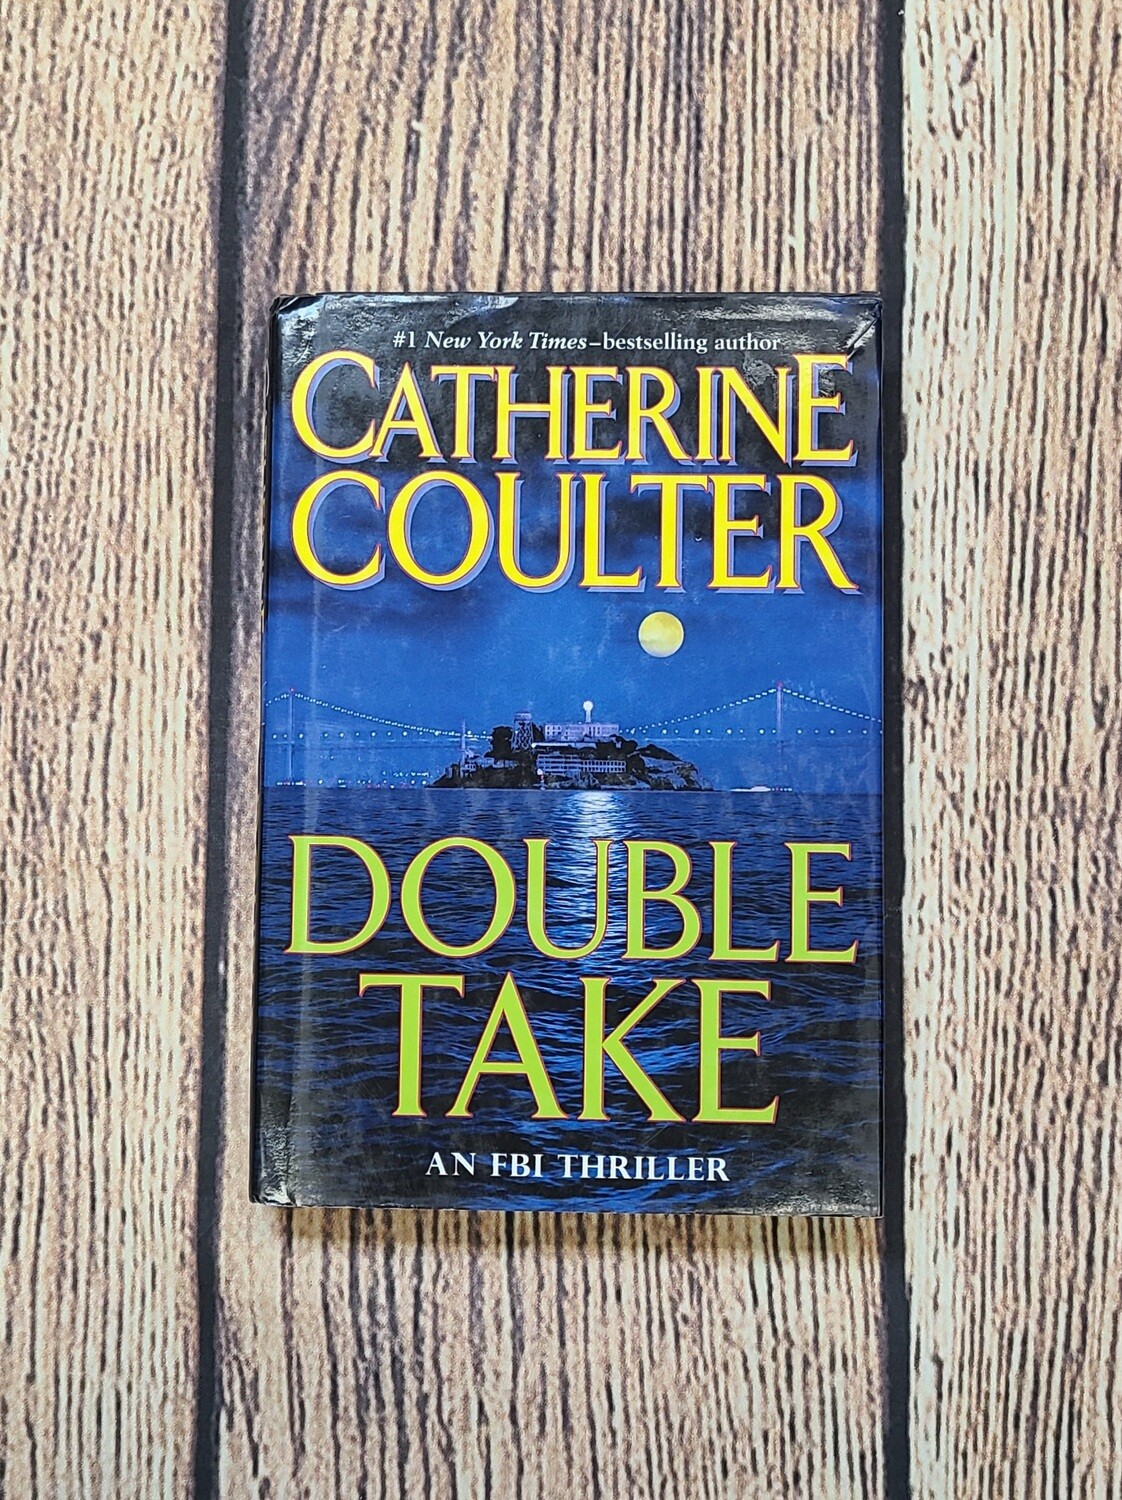 Double Take by Catherine Coulter - Hardback